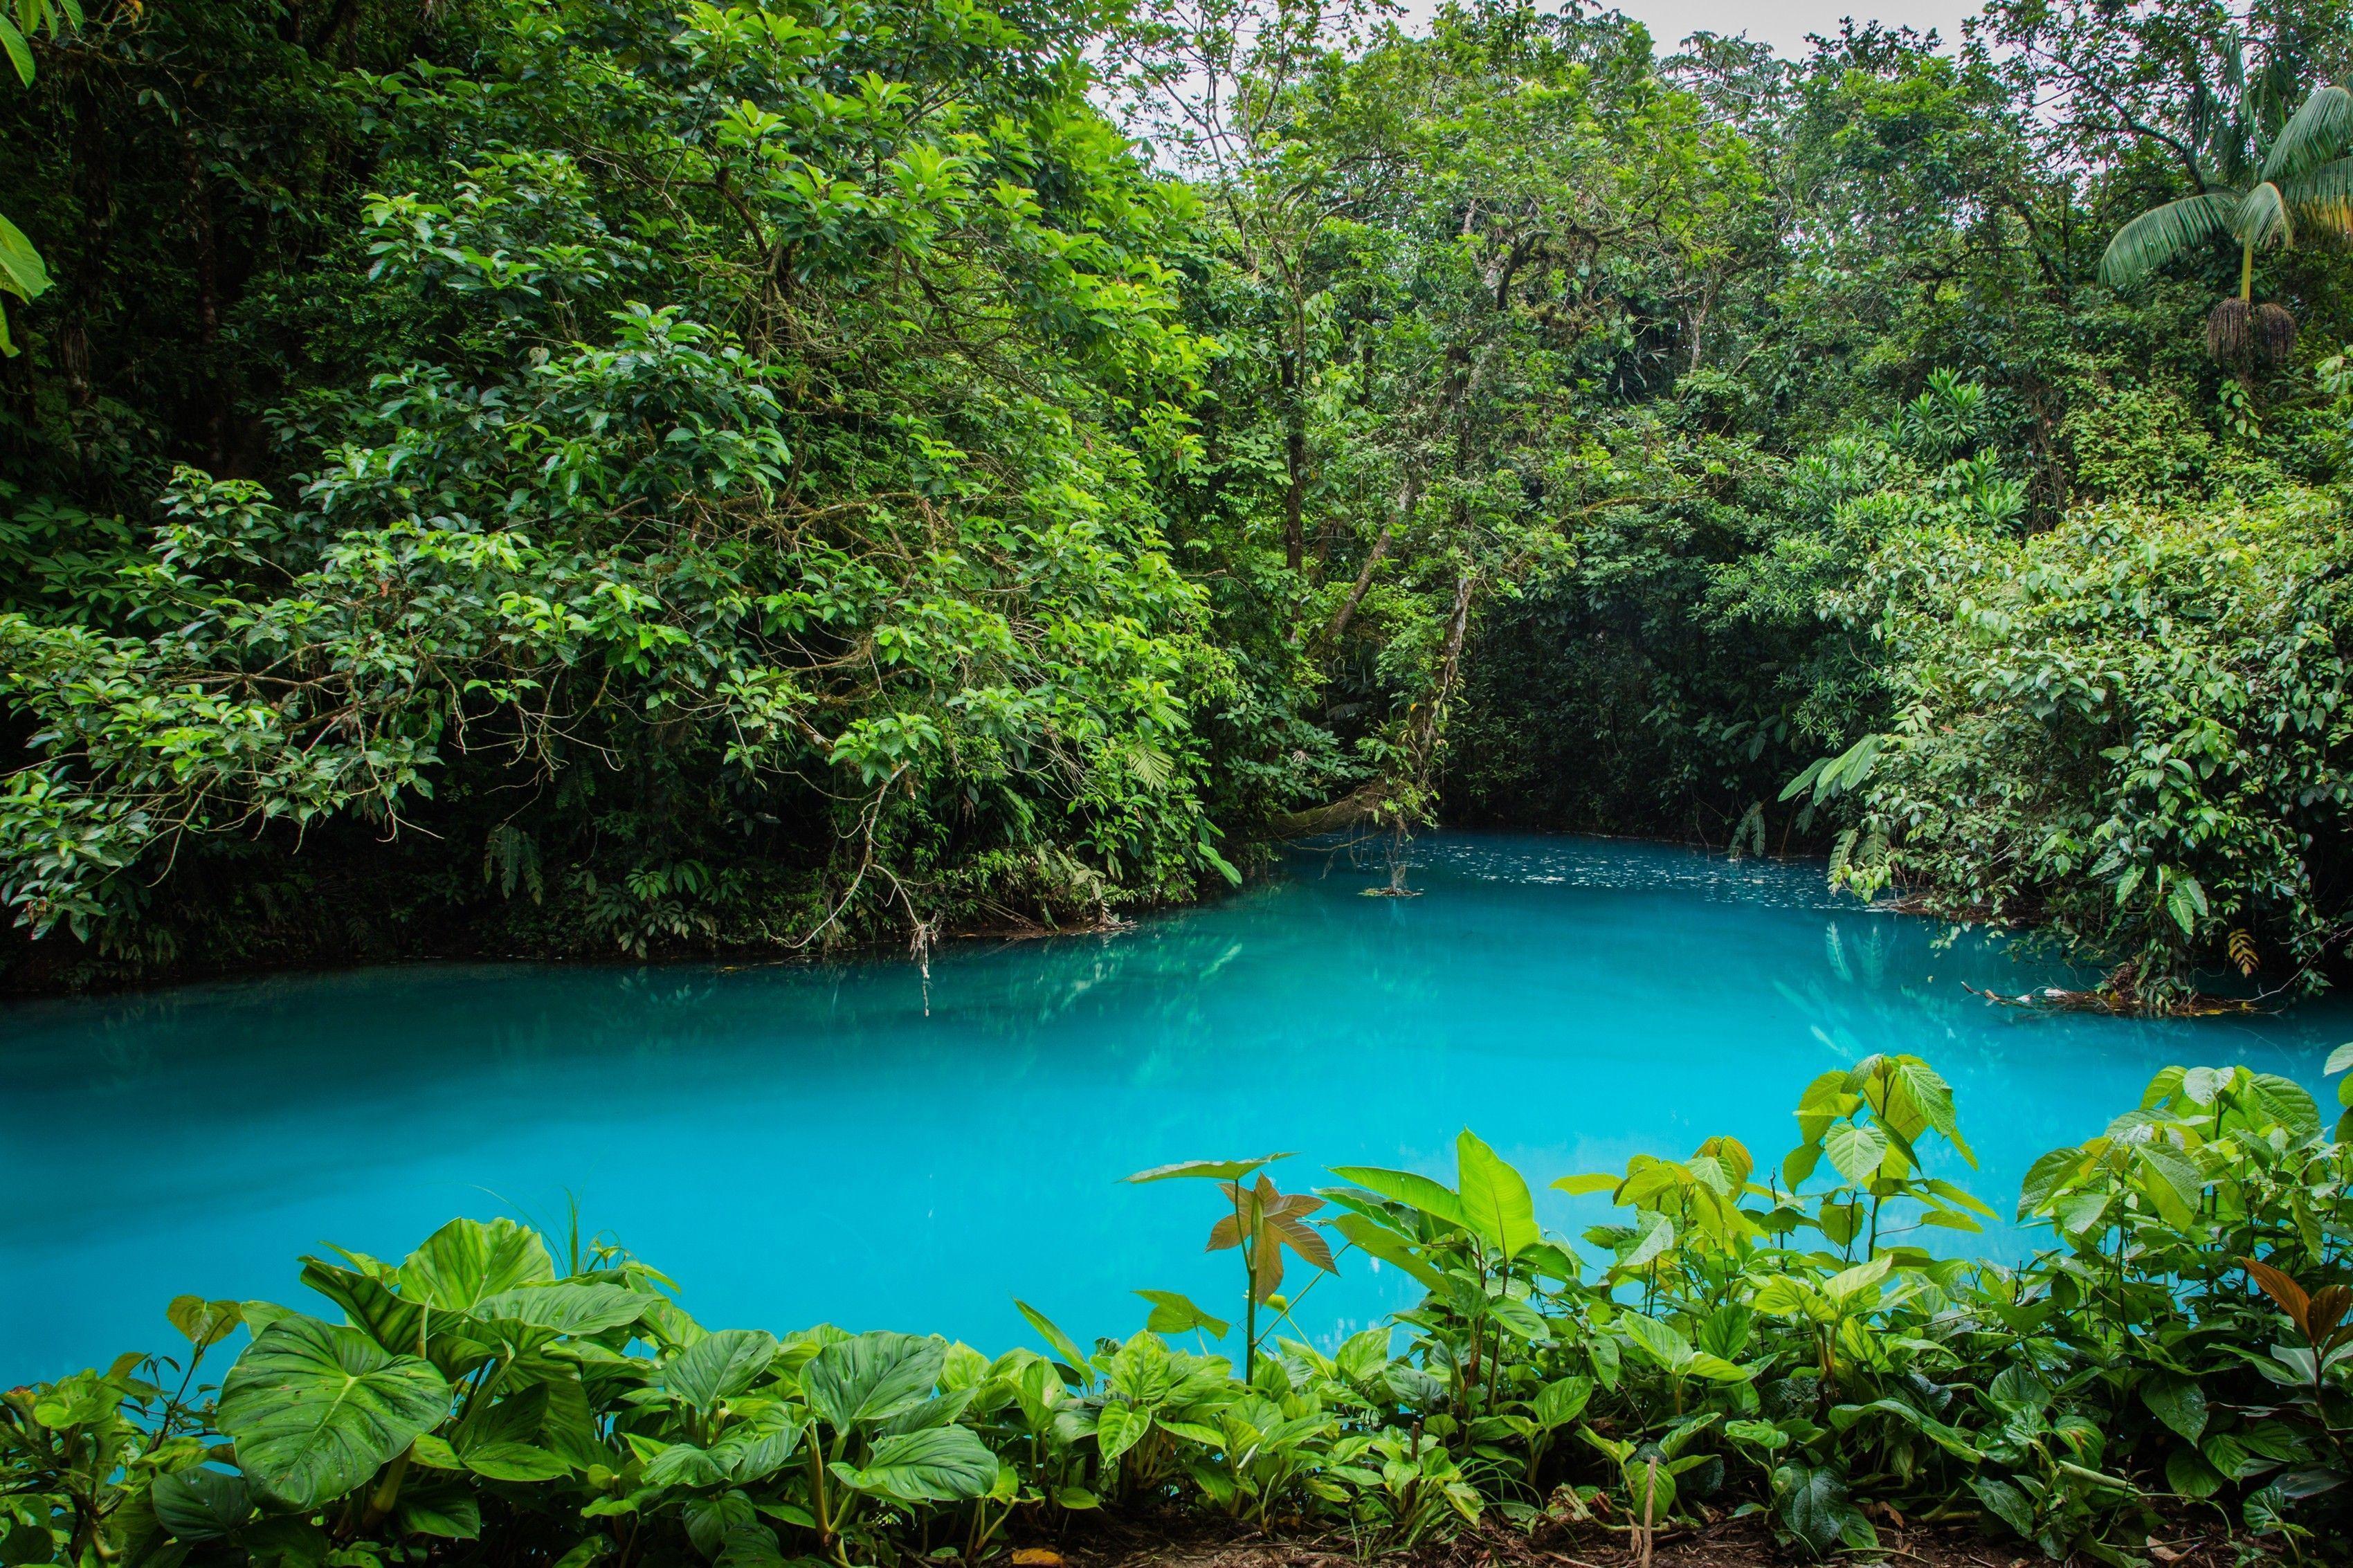 Costa Rica National Park wallpaper and image